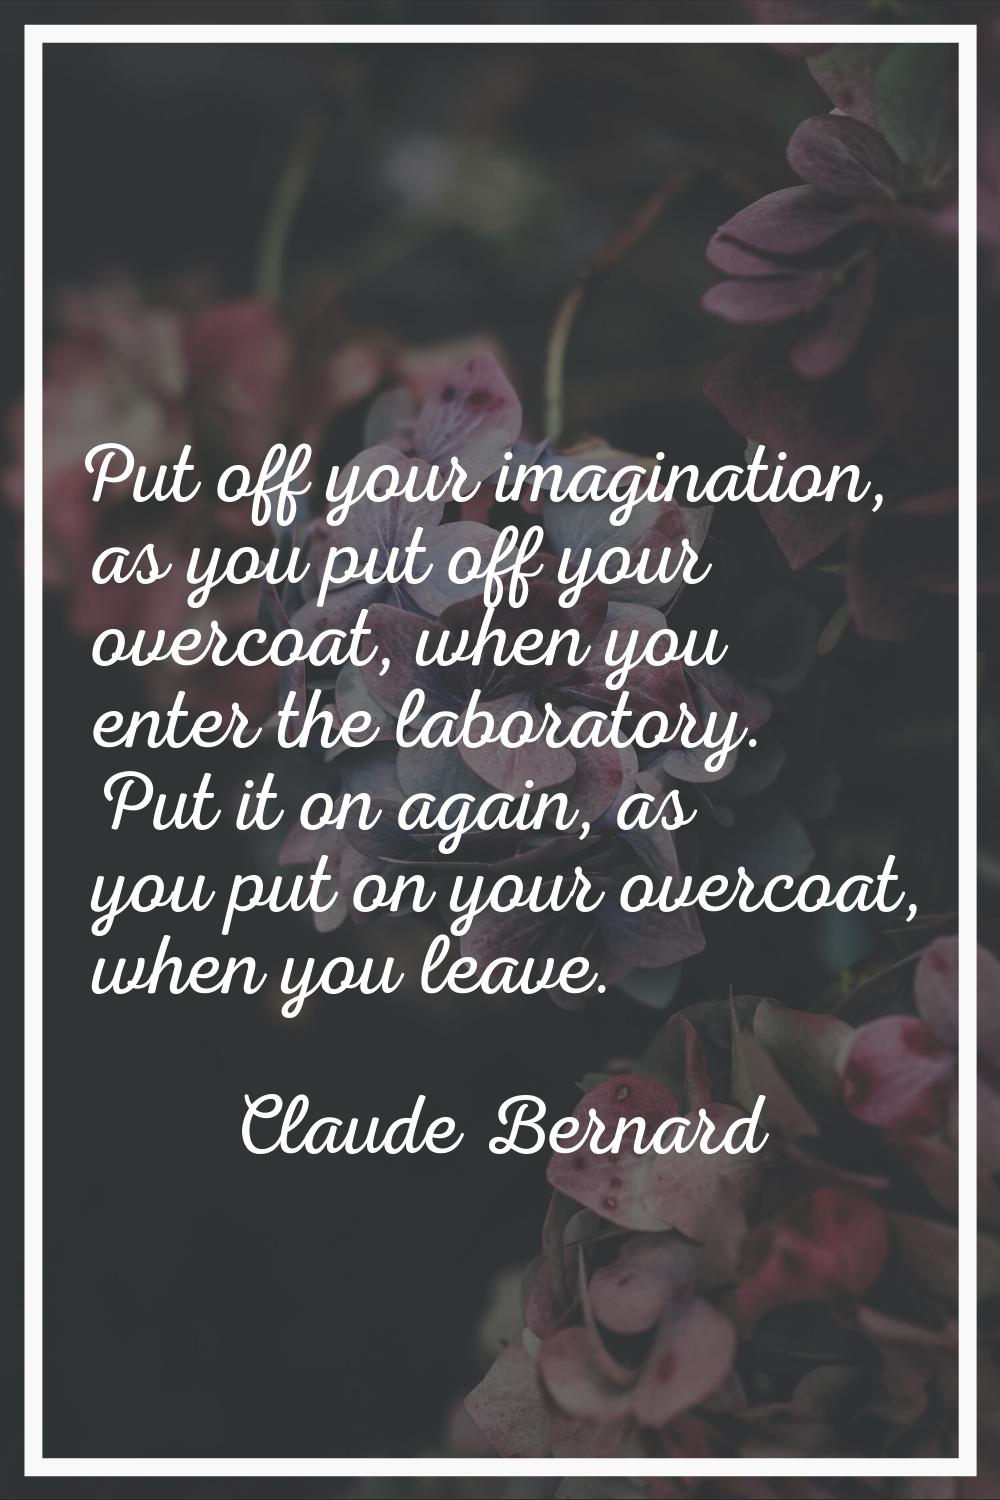 Put off your imagination, as you put off your overcoat, when you enter the laboratory. Put it on ag